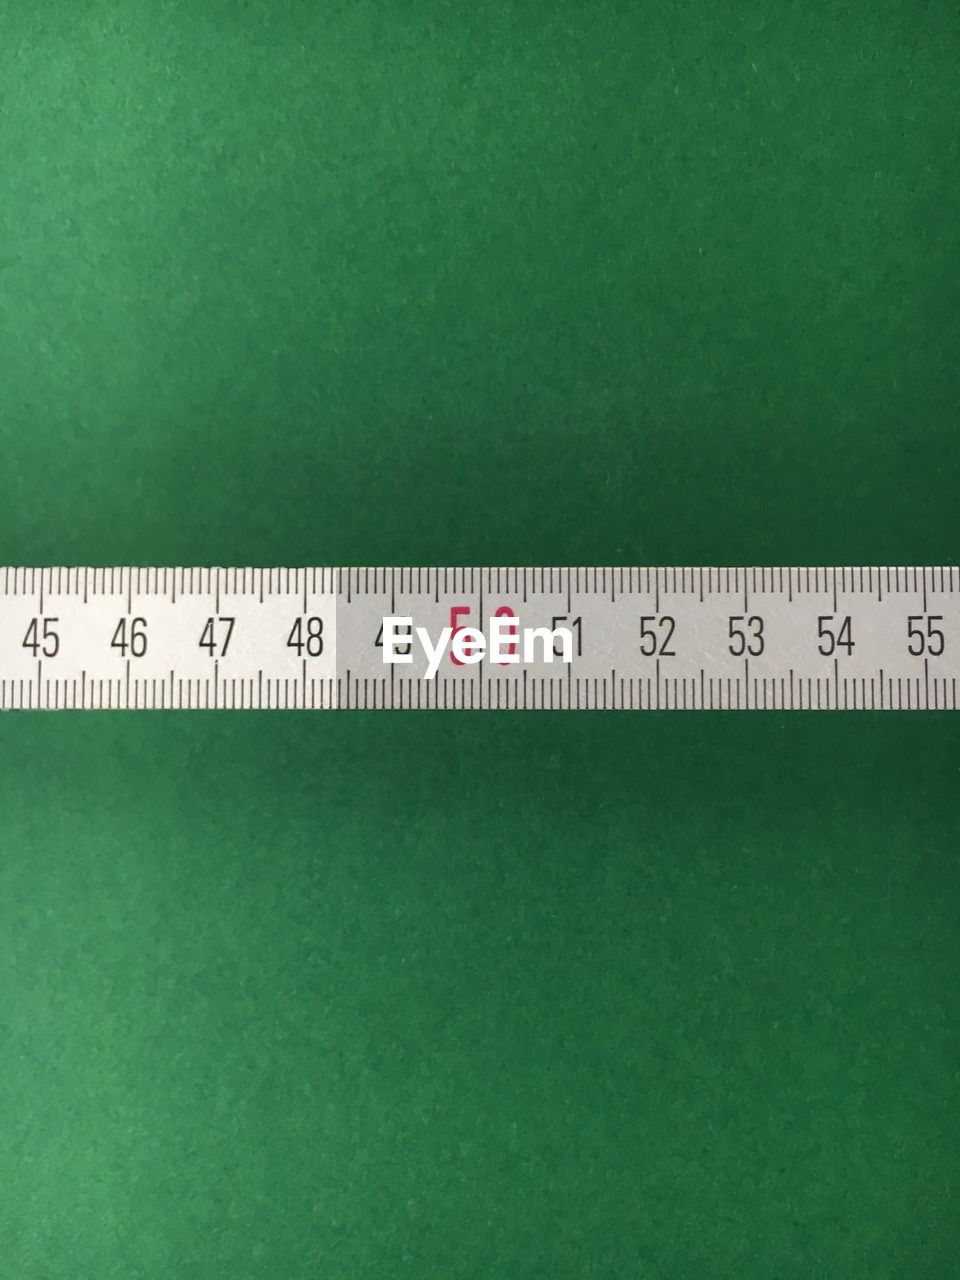 Close-up of tape measure against green background